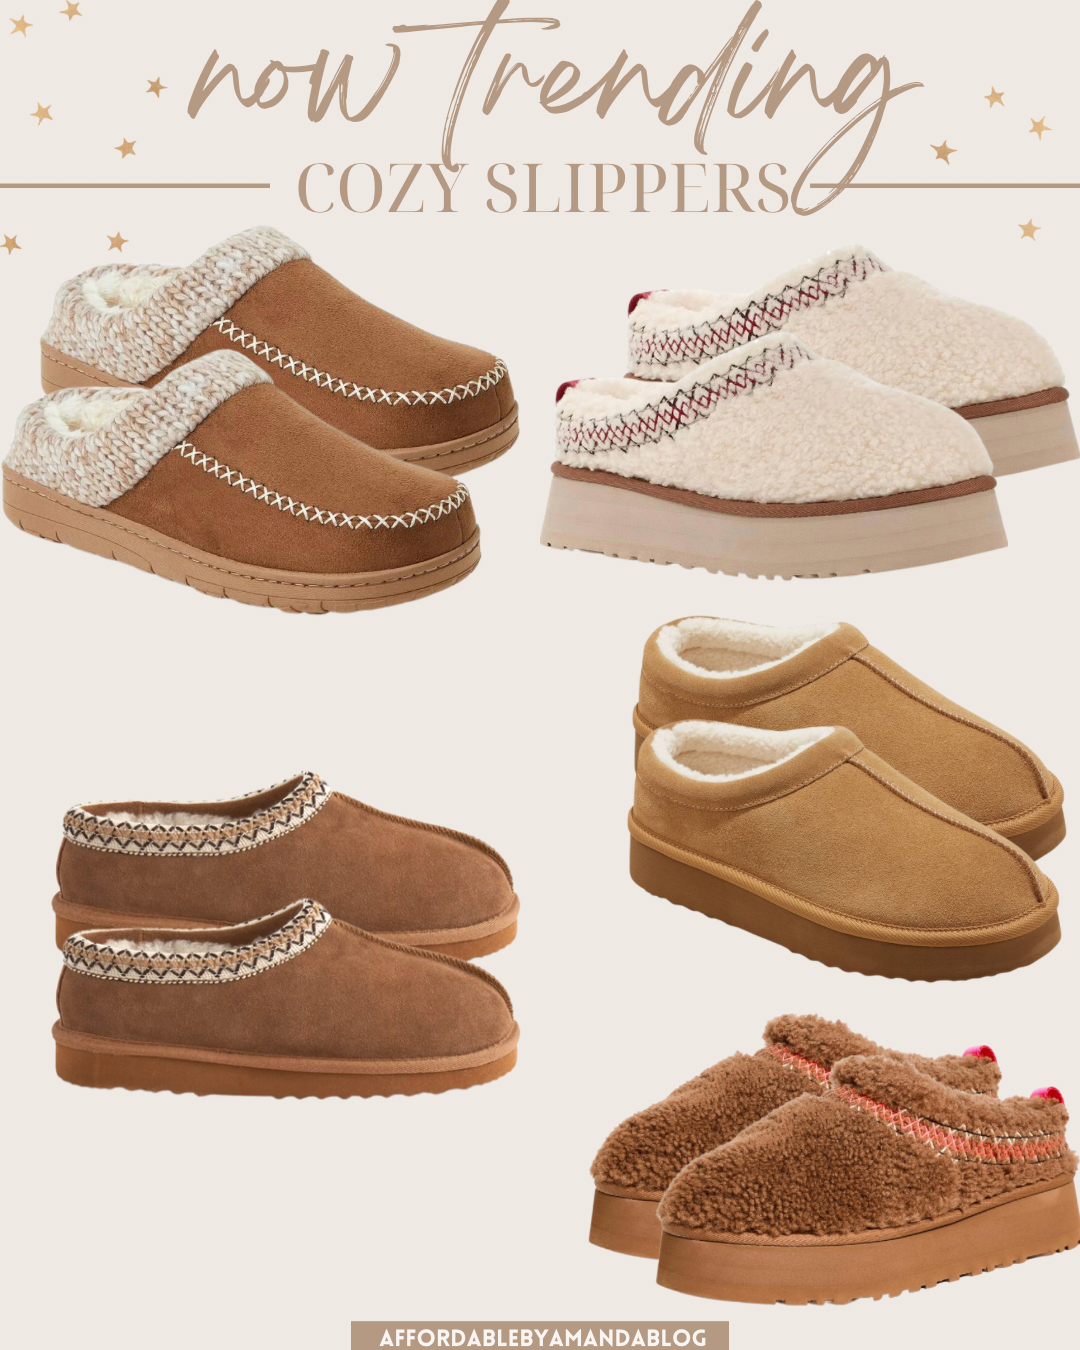 UGG Tasman Slippers Outfit Ideas - 5 Winter Fashion Trends To Wear Now 